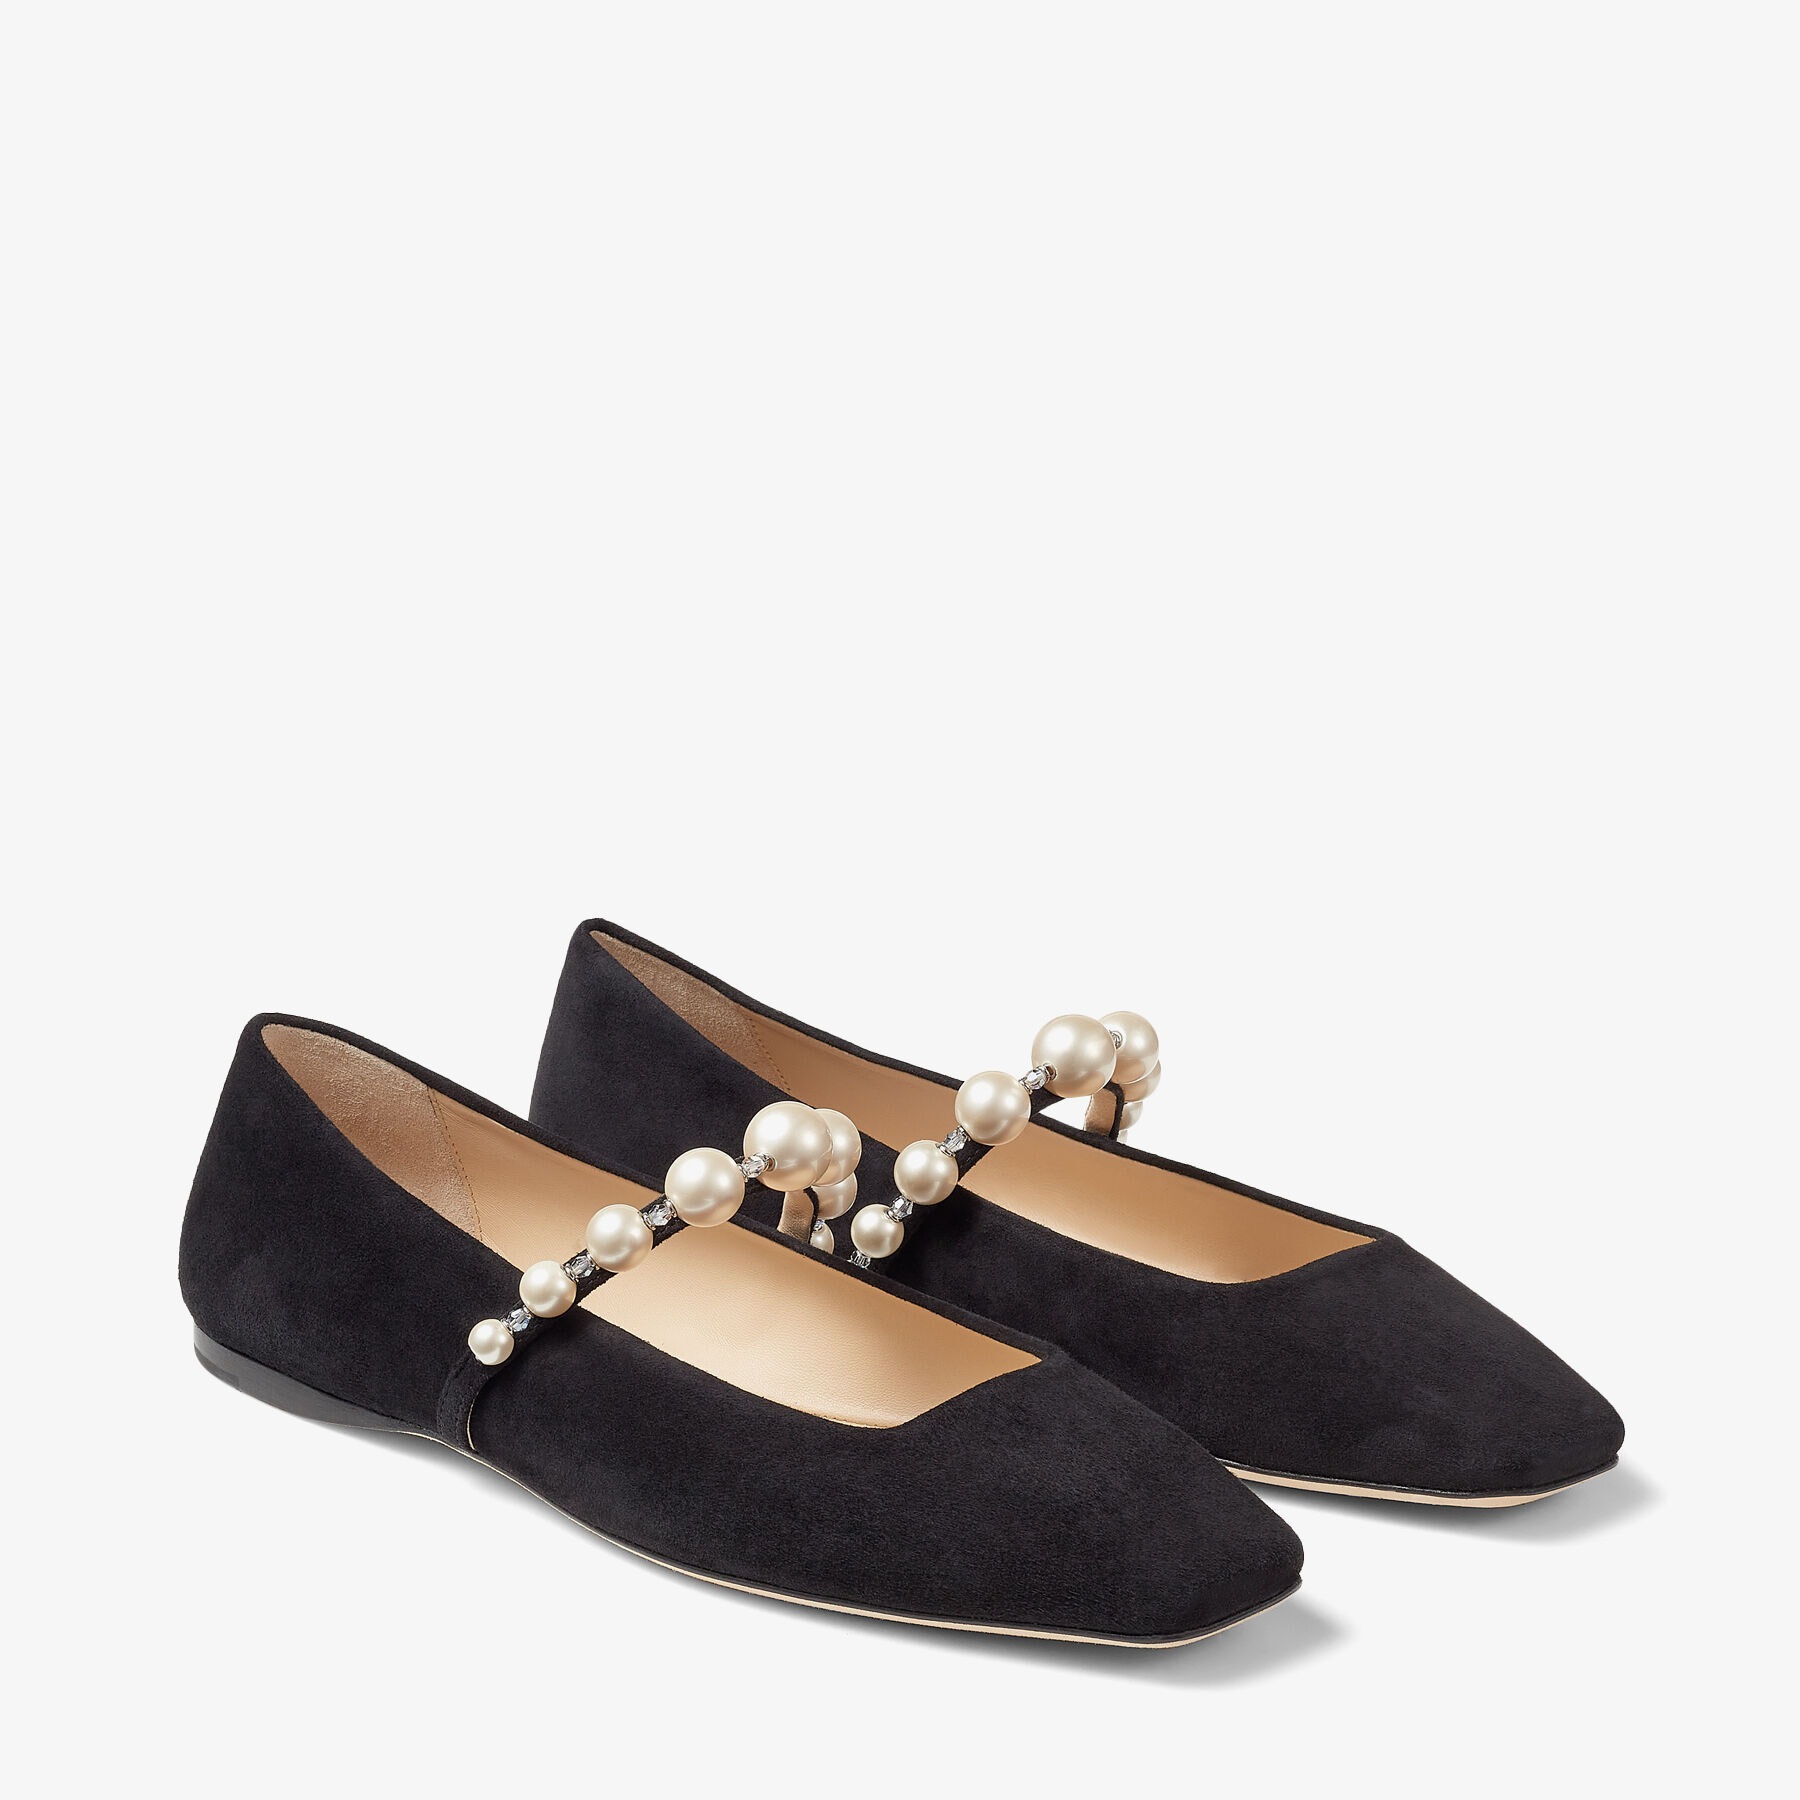 Black Suede Flats with Pearl Embellishment | ADE FLAT | High